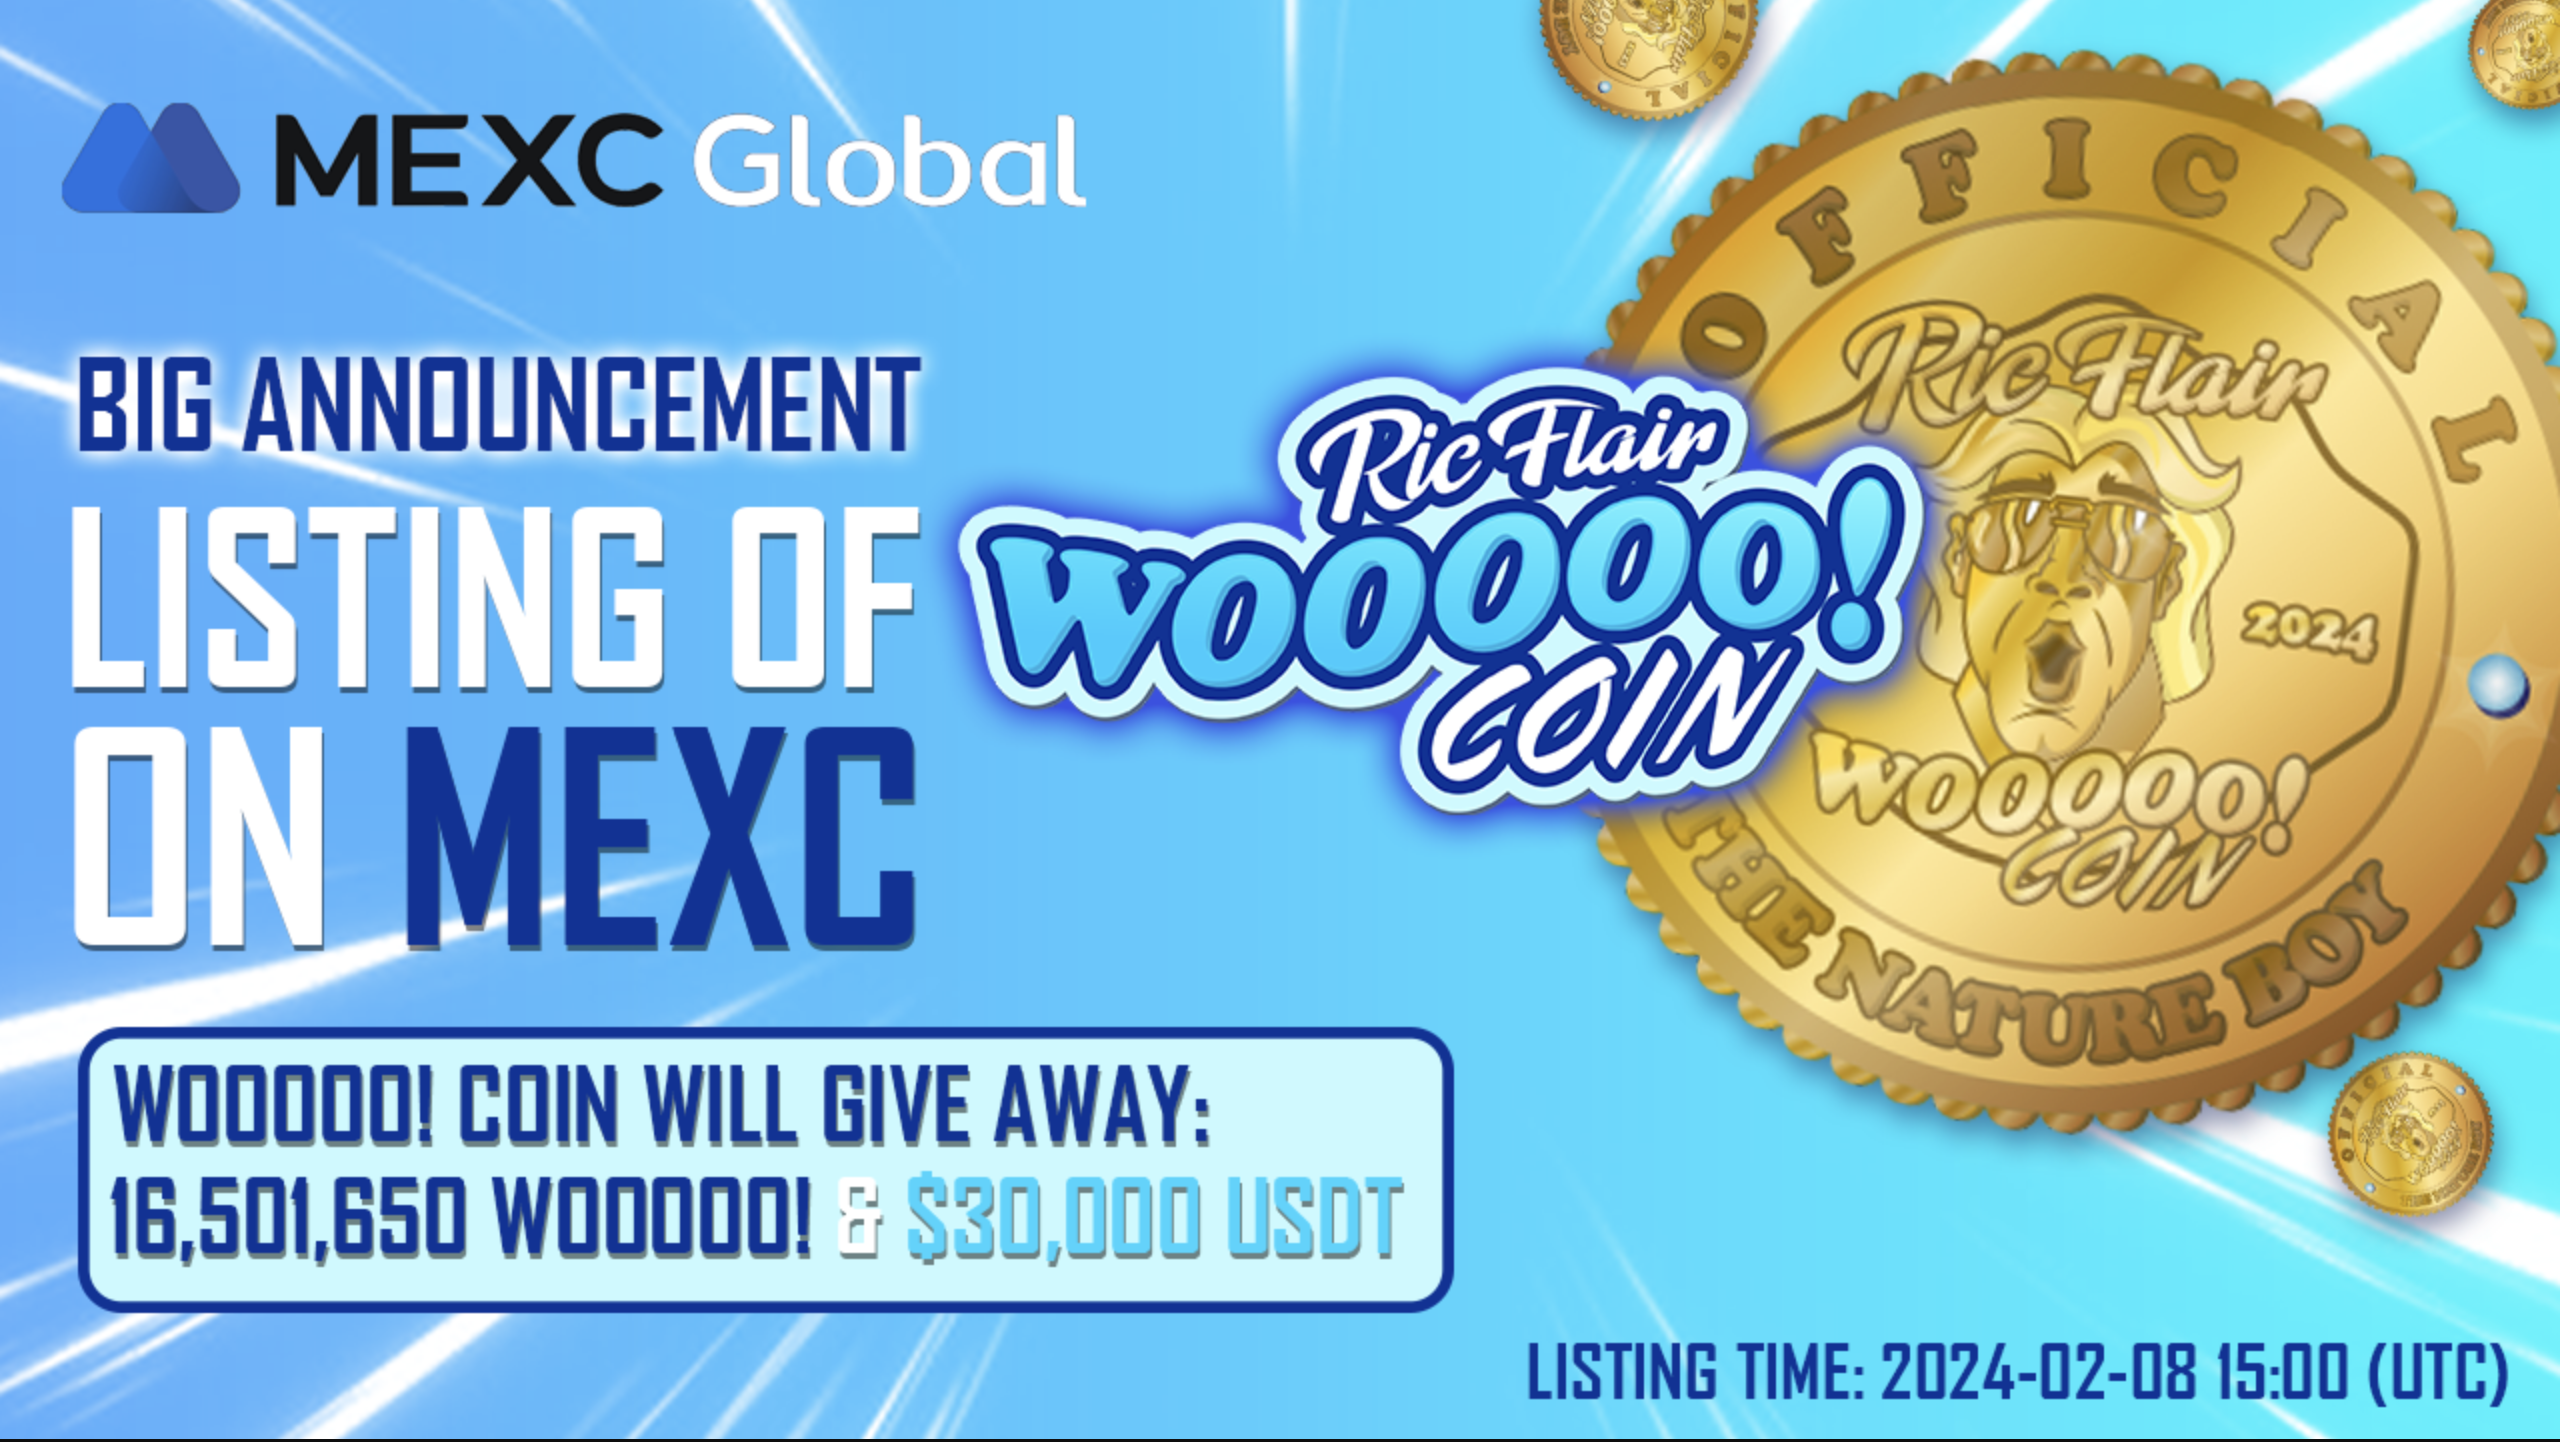 WOOOOO! Coin Lands on MEXC with 30,000 USDT and 16.5 Million WOOOOO! AirdropTo inaugurate the listing, MEXC organizes an airdrop event involving 30,000 USDT and 16.5 million WOOOOO tokens. Find the registration eligibility terms below. WOOOOO! Coin has a simple but fun approach to DeFi, celebrating an emblematic personality of American wrestling. Ric Flair, also known as “Nature Boy,” is an American professional wrestler many consider the greatest professional wrestler of all time. His famous "WOOOOO!" catchphrase has defined his flamboyant persona and still echoes throughout the world of wrestling. The project has the growing support of sports fans familiar with Ric Flair and his impact on wrestling history. Furthermore, the team invites crypto enthusiasts of all backgrounds to join a community of like-minded people. Therefore, the token and its features are built to promote inclusivity and accessibility, offering equal opportunities to everyone backing it. Behind WOOOOO! Coin is a creative and passionate team that prioritizes security and transparency. Listing the token on the MEXC Exchange aligns with the project's mission to become a standout asset within the broader cryptocurrency ecosystem. This partnership gives users access to a highly liquid trading platform, facilitating seamless transactions and increasing token awareness. WOOOOO! Coin is an ERC-20 token built on Ethereum with a total supply of 10,000,000,000 tokens. The token employs Dynamic Token Liquidation (DLT) to compare its own price in Dollars with the liquidity and price in the same event. This helps it determine a safe amount it can liquidate when a holder sells. As a result, the token ensures it does not break or negatively impact liquidity. The project has been audited by Hacken and is subject to a token lock on Uniswap V2. WOOOOO! Coin goes live to trade today at 15:00 UTC and you can buy WOOOOO! at MEXC here. The WOOOOO! Coin and USDT Airdrop The listing of WOOOOO! Coin on the MEXC Exchange involves an airdrop of over 16.5 million WOOOOO tokens and 30,000 USDT. Here are the eligibility requirements: Hold at least 1,000 MX or more for 30 consecutive days before 2024-02-06 16:00 (UTC) Voting Period: 2024-02-07 13:00 to 2024-02-08 12:50 (UTC) Trading: 2024-02-08 15:00 (UTC) Deposit: Opened Withdrawal: 2024-02-09 15:00 (UTC) Voting Link: https://www.mexc.com/sun/assessment Airdrop Details: 16,501,650 WOOOOO & 30,000 USDT Voting Token: MX Requirements: 1,000 ≤ MX ≤ 500,000 You can commit based on your maximum committable quantity. Successful commitments will only be used for reward calculation, and your MX will not be frozen. Rewards: The airdrop rewards will be distributed proportionally within an hour according to users’ total votes once the event concludes. You can also participate in other ongoing Kickstarter events after successfully participating in this event. Those interested in learning more about WOOOOO! Coin can visit these links: Website | X (Twitter) | Telegram | Discord